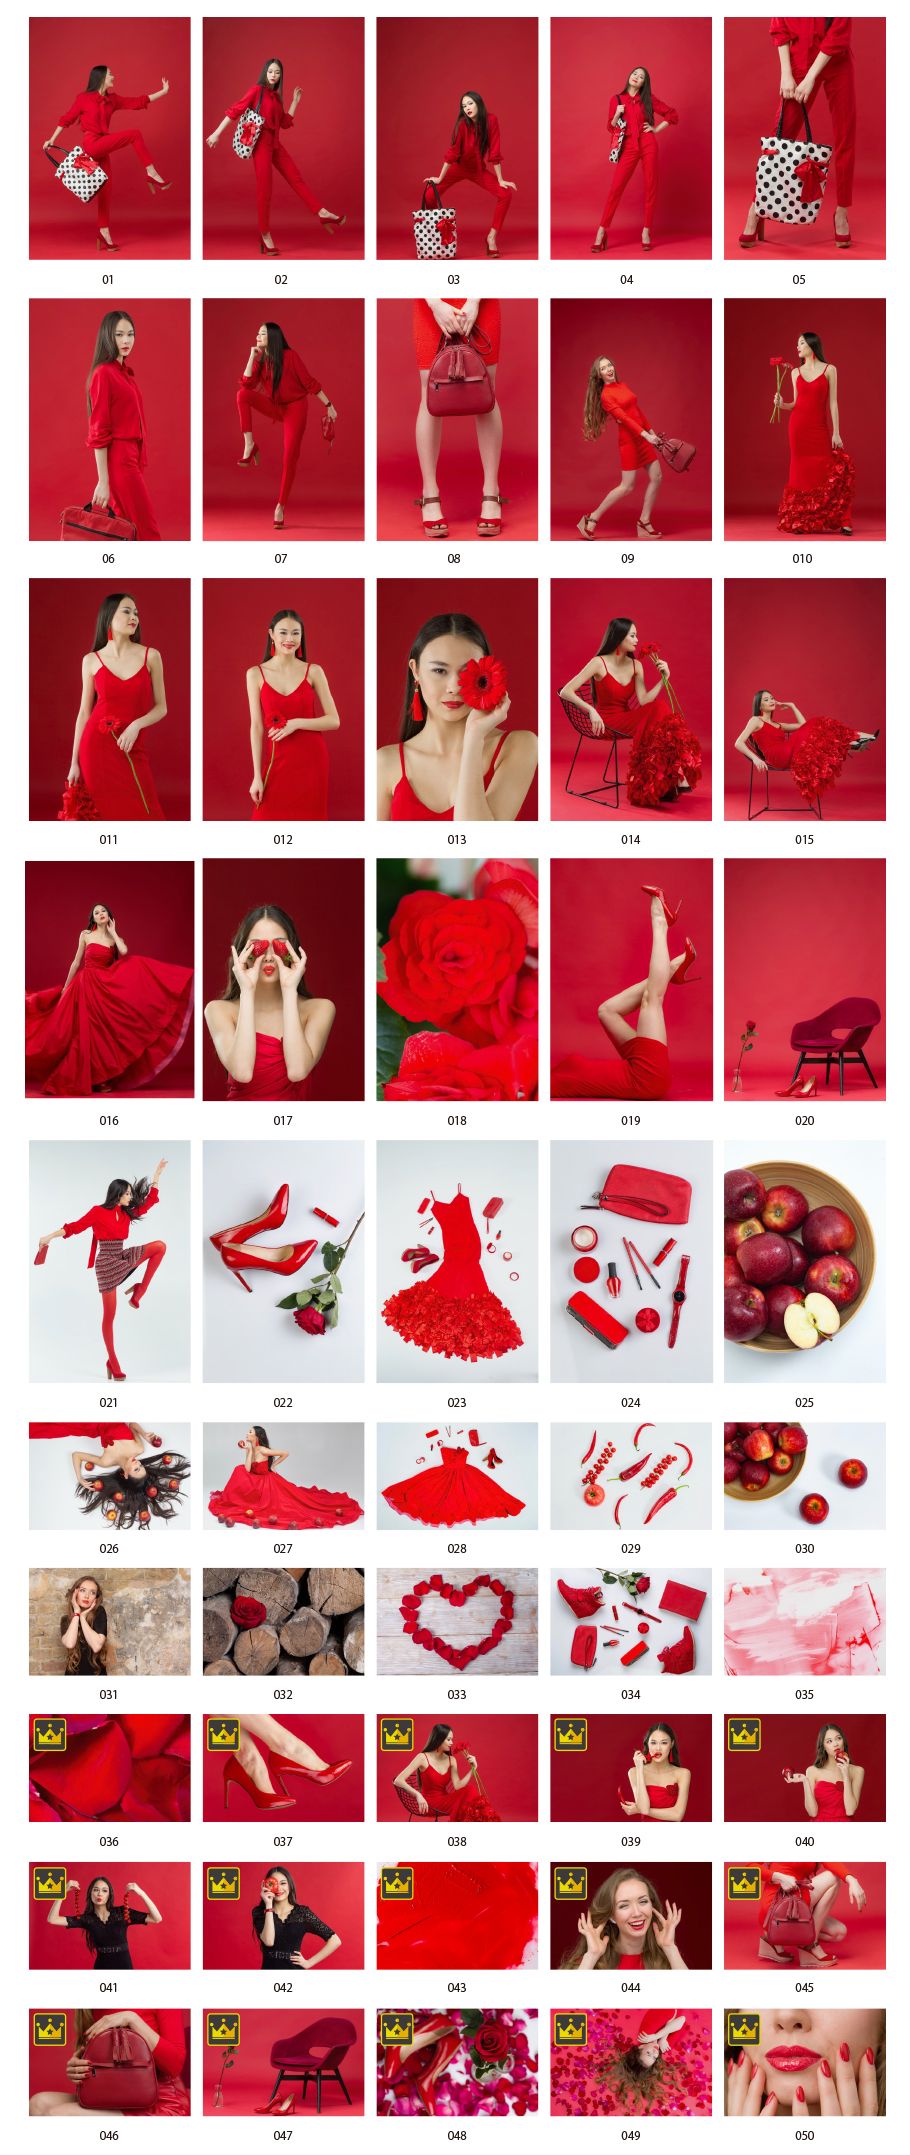 Red image photos